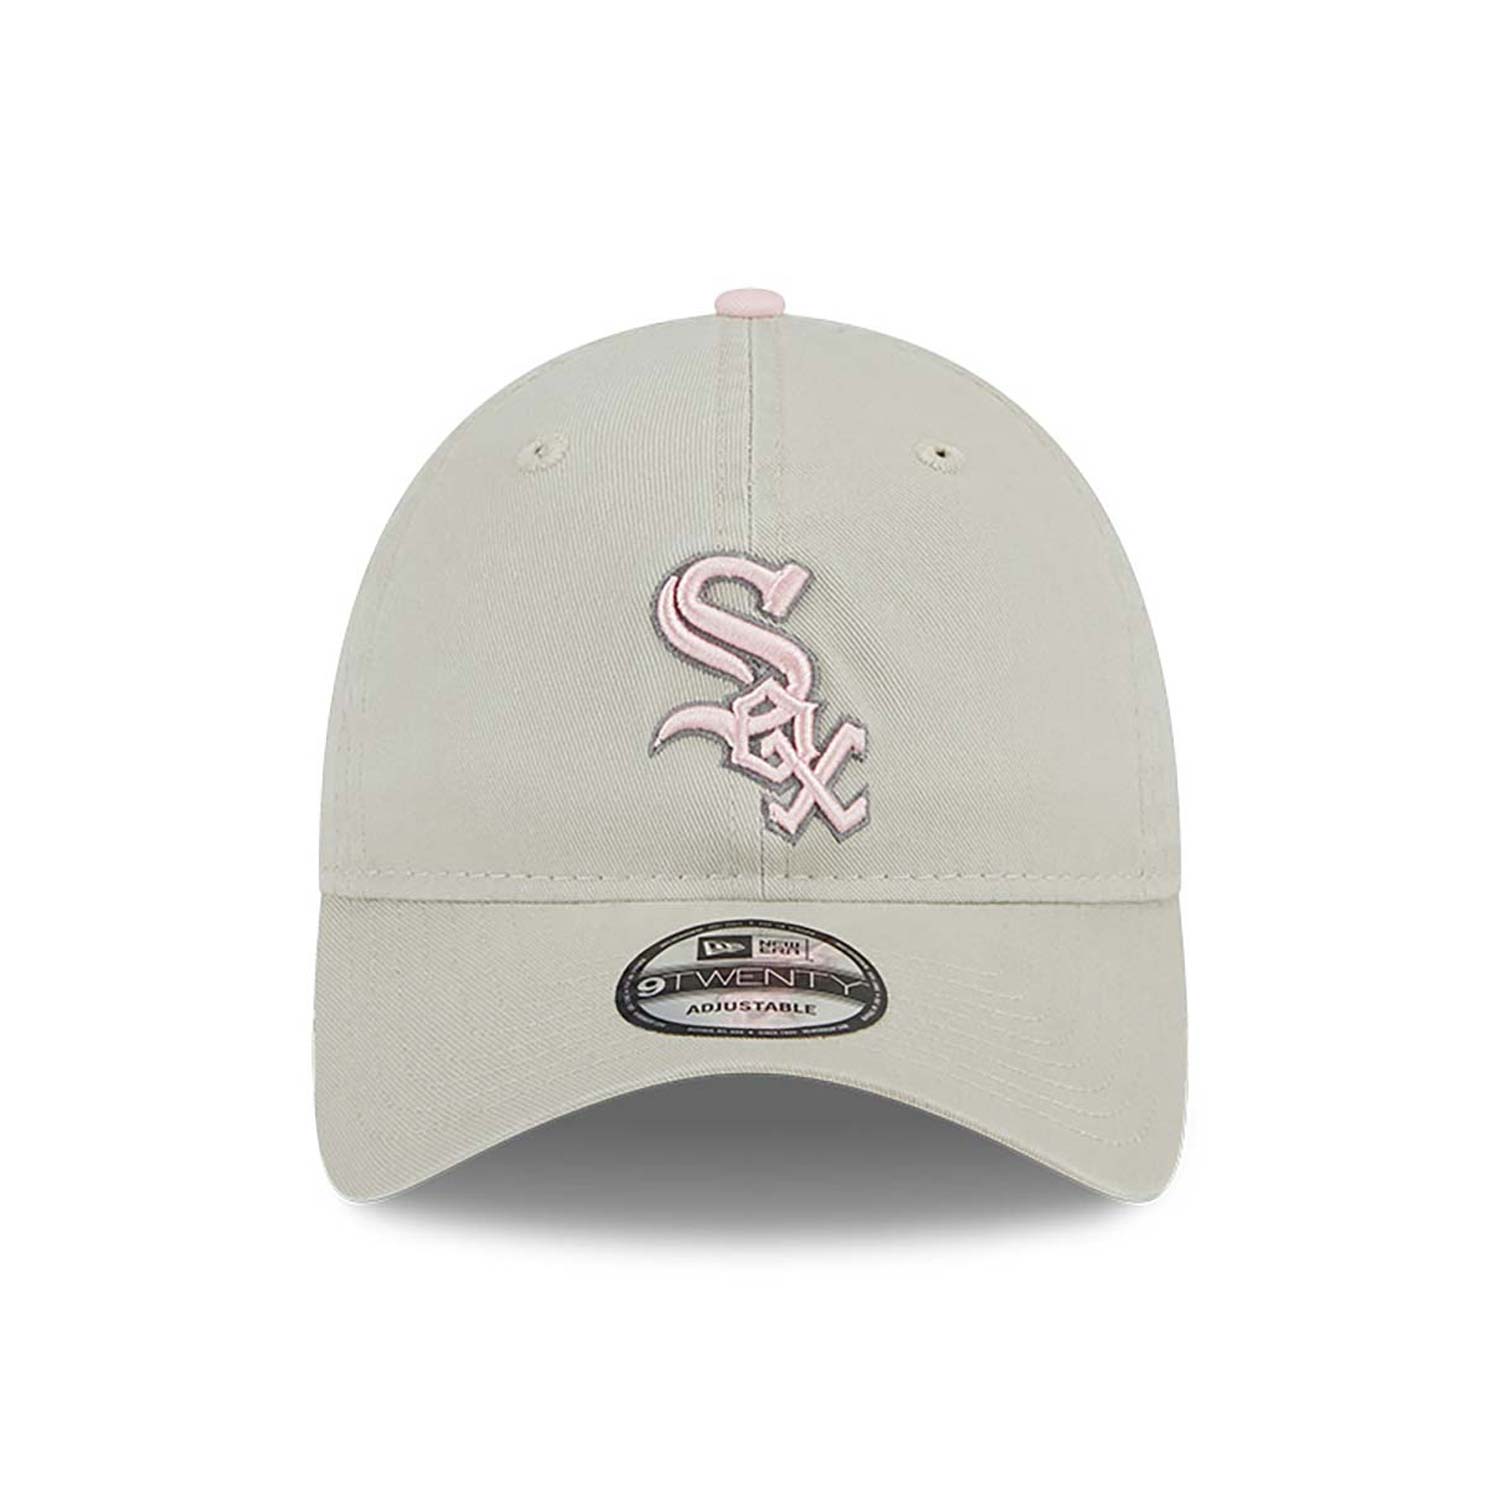 Official New Era MLB Mothers Day Chicago White Sox 9TWENTY Cap D01_2